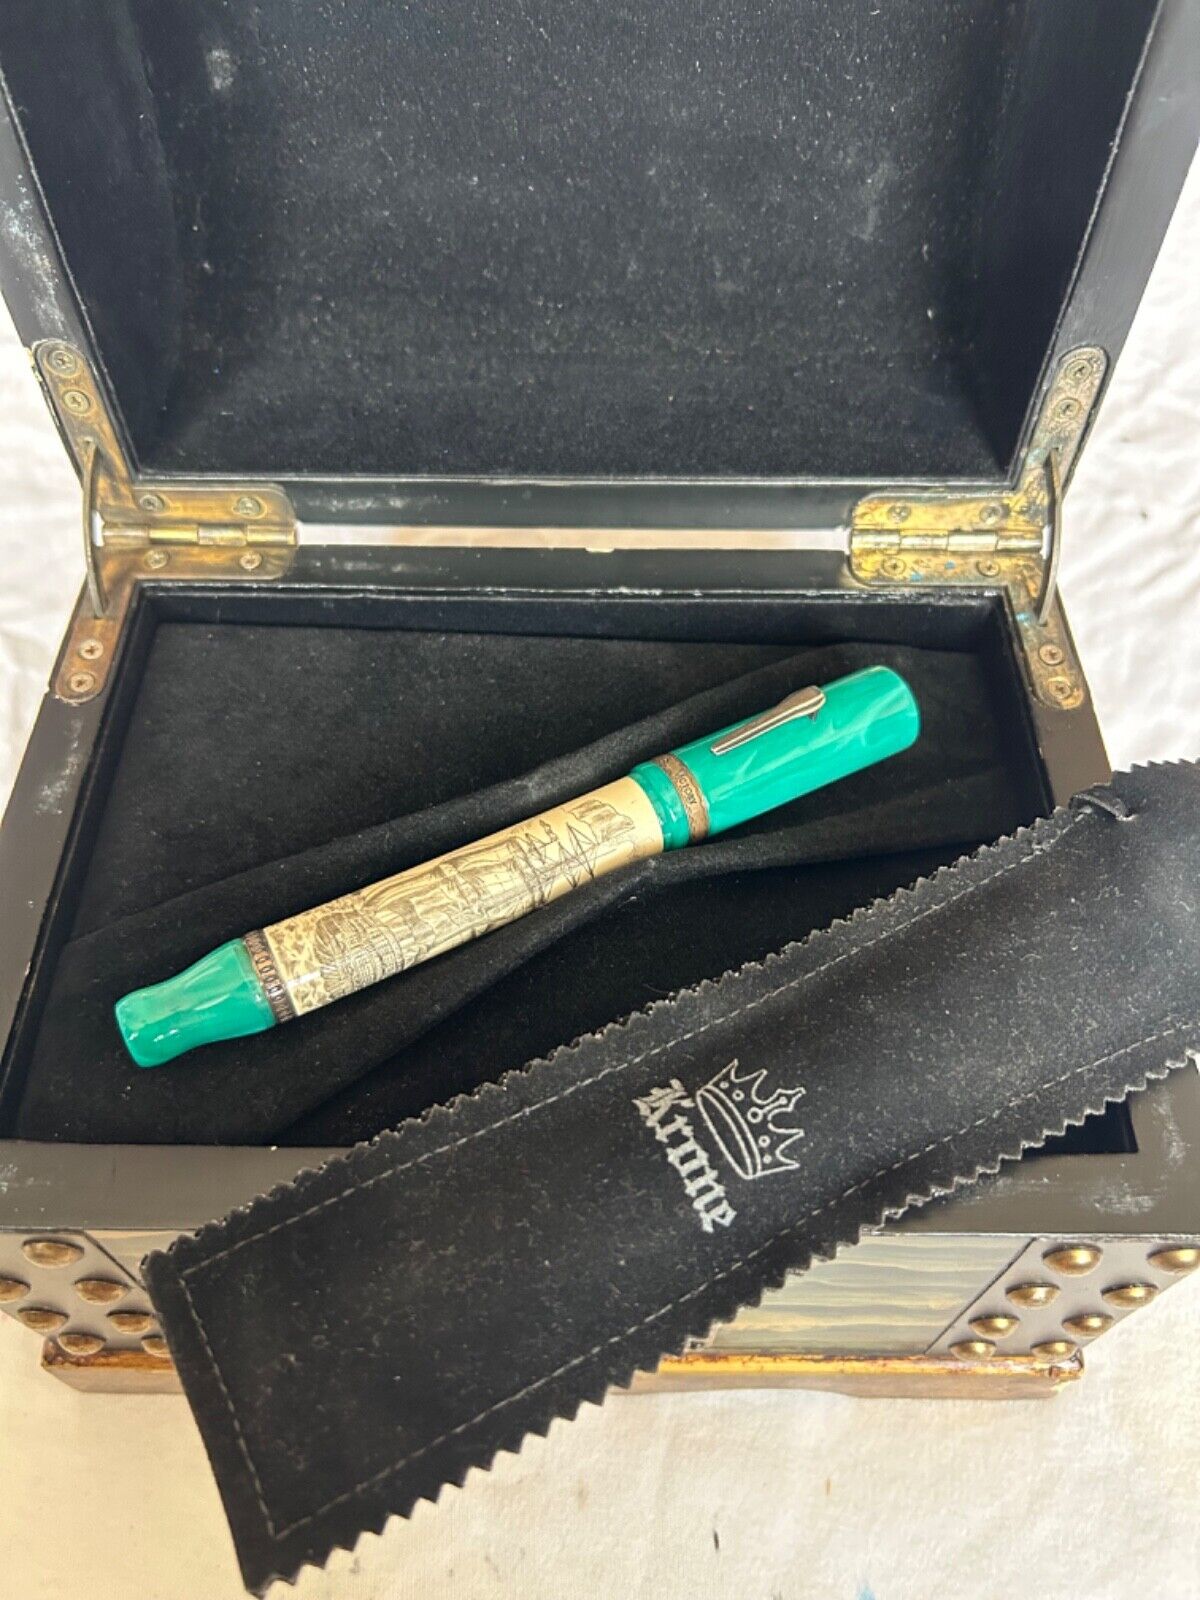 Krone HMS Victory Limited Edition of 150 Pcs Fountain Pen-Mint